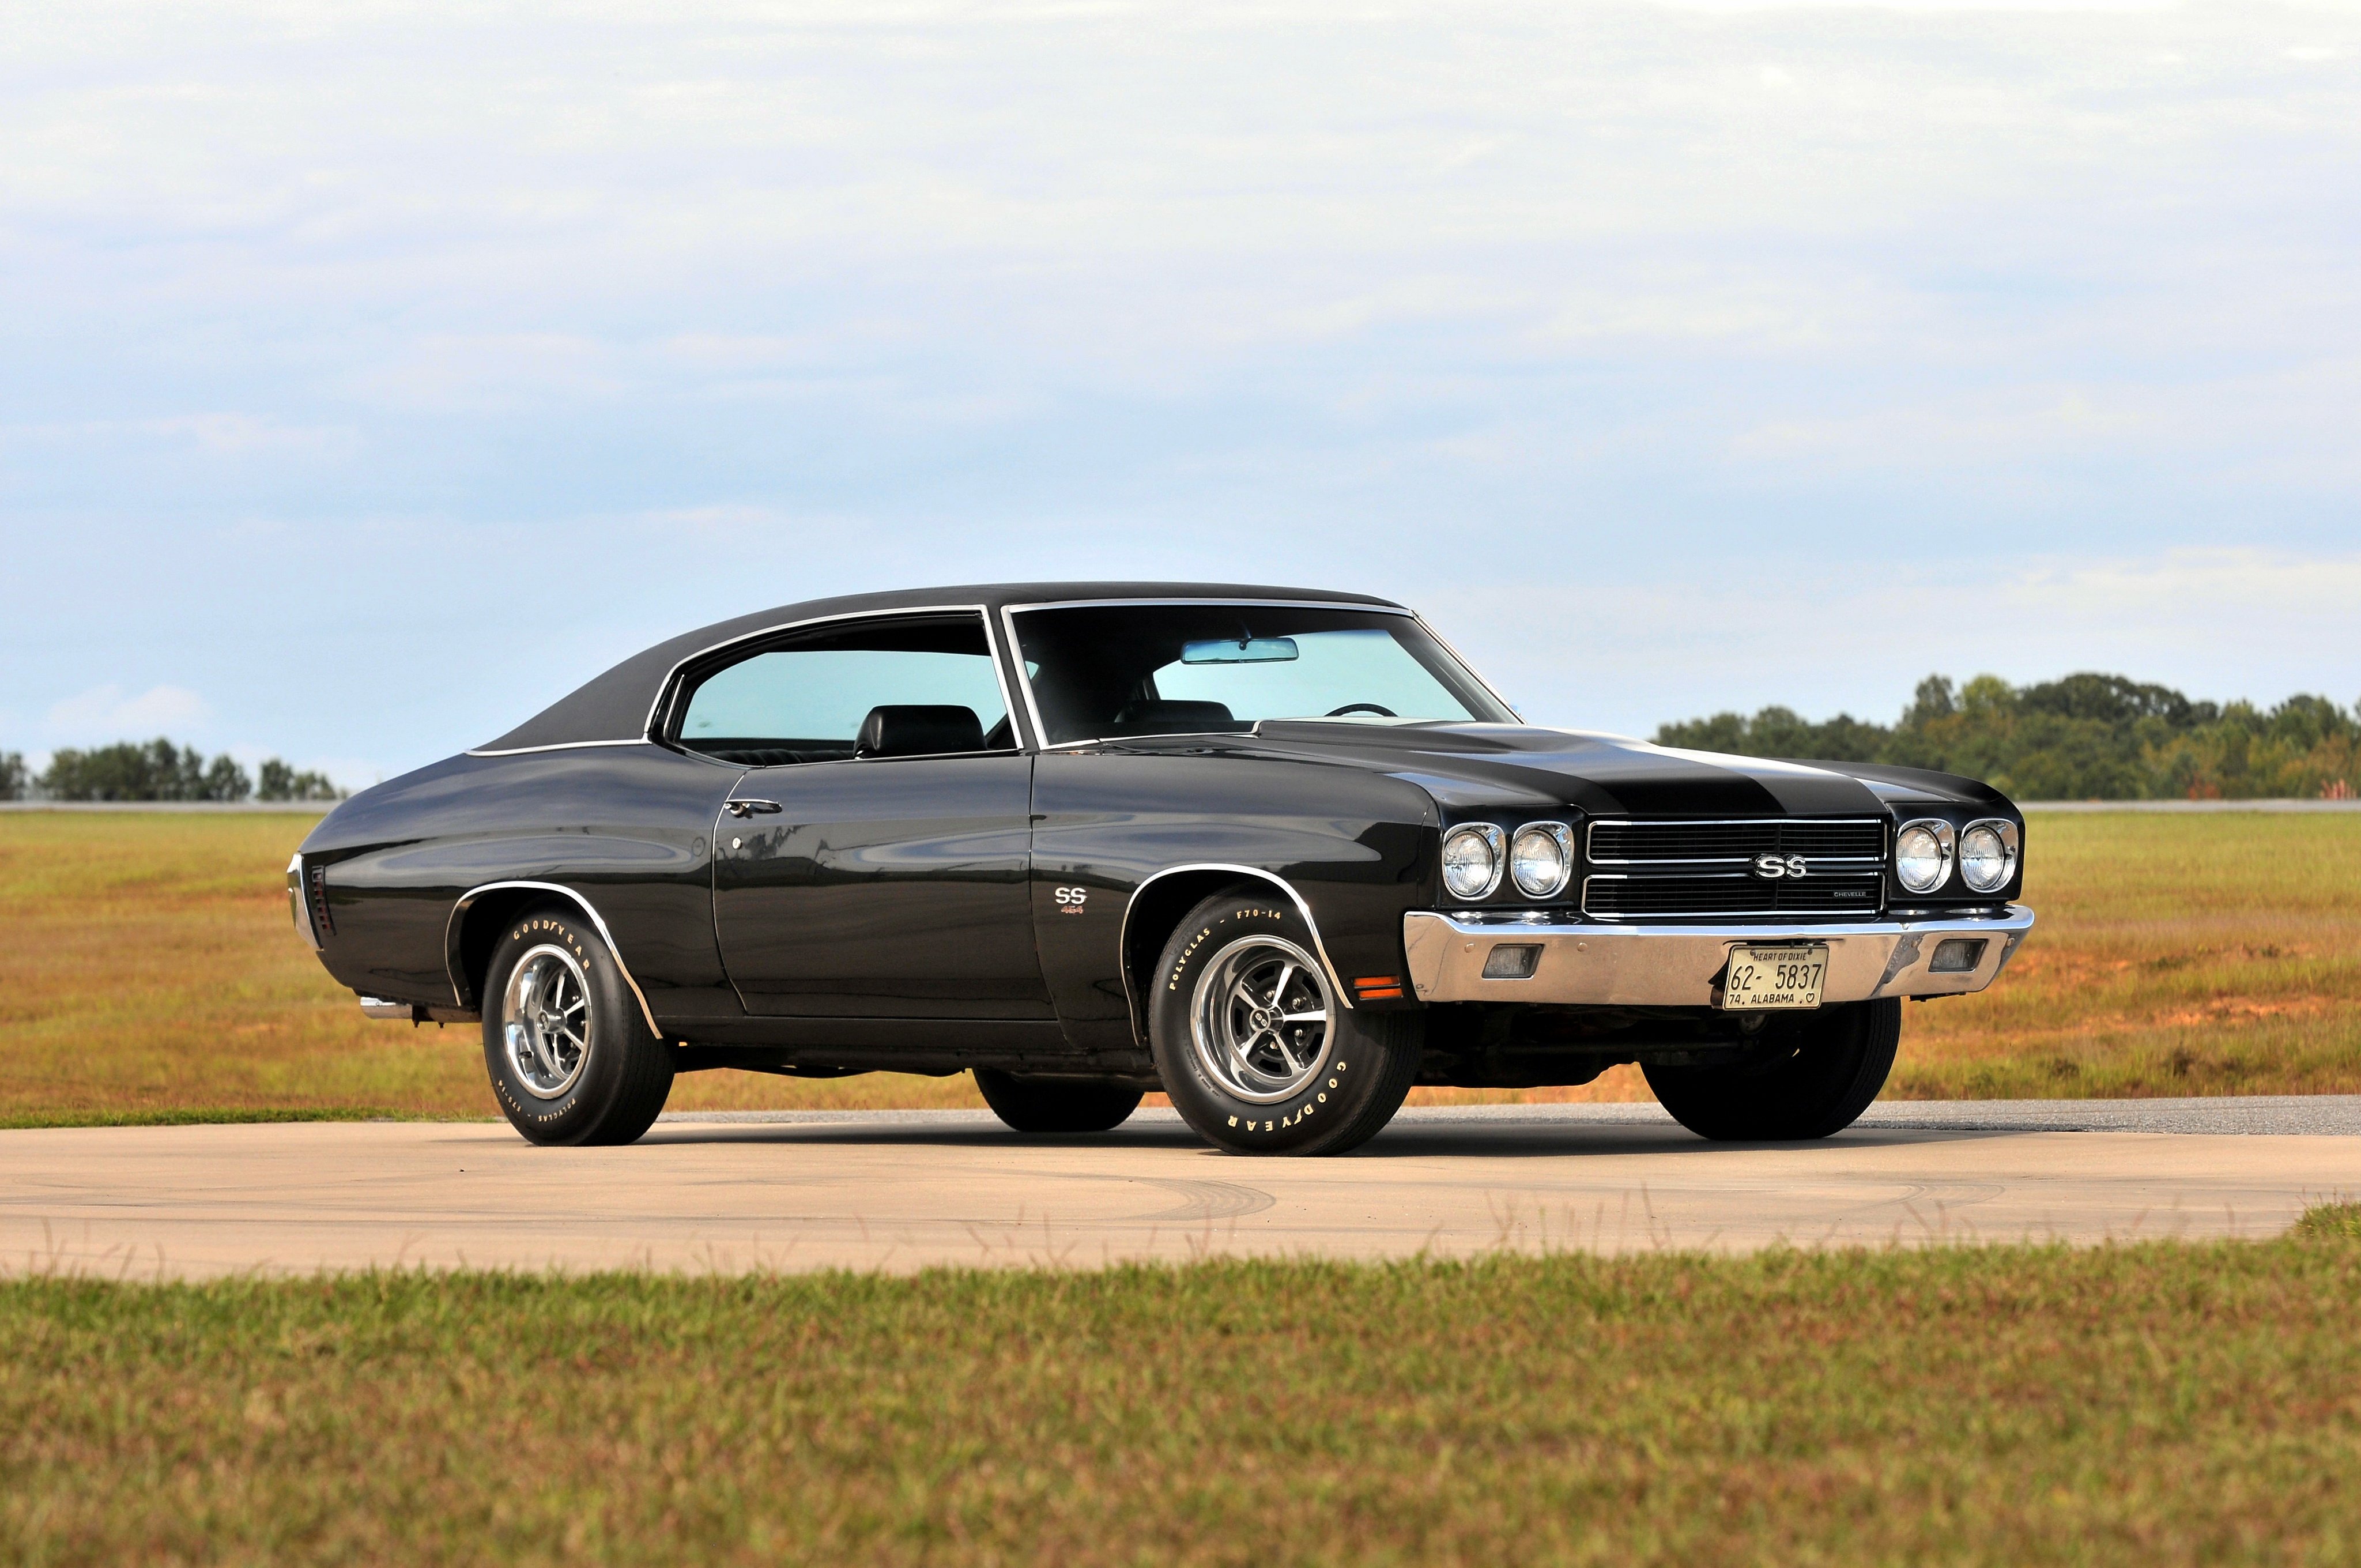 1970, Chevrolet, Chevelle, S s, 454, Ls6, Hardtop, Coupe, Muscle, Classic Wallpaper